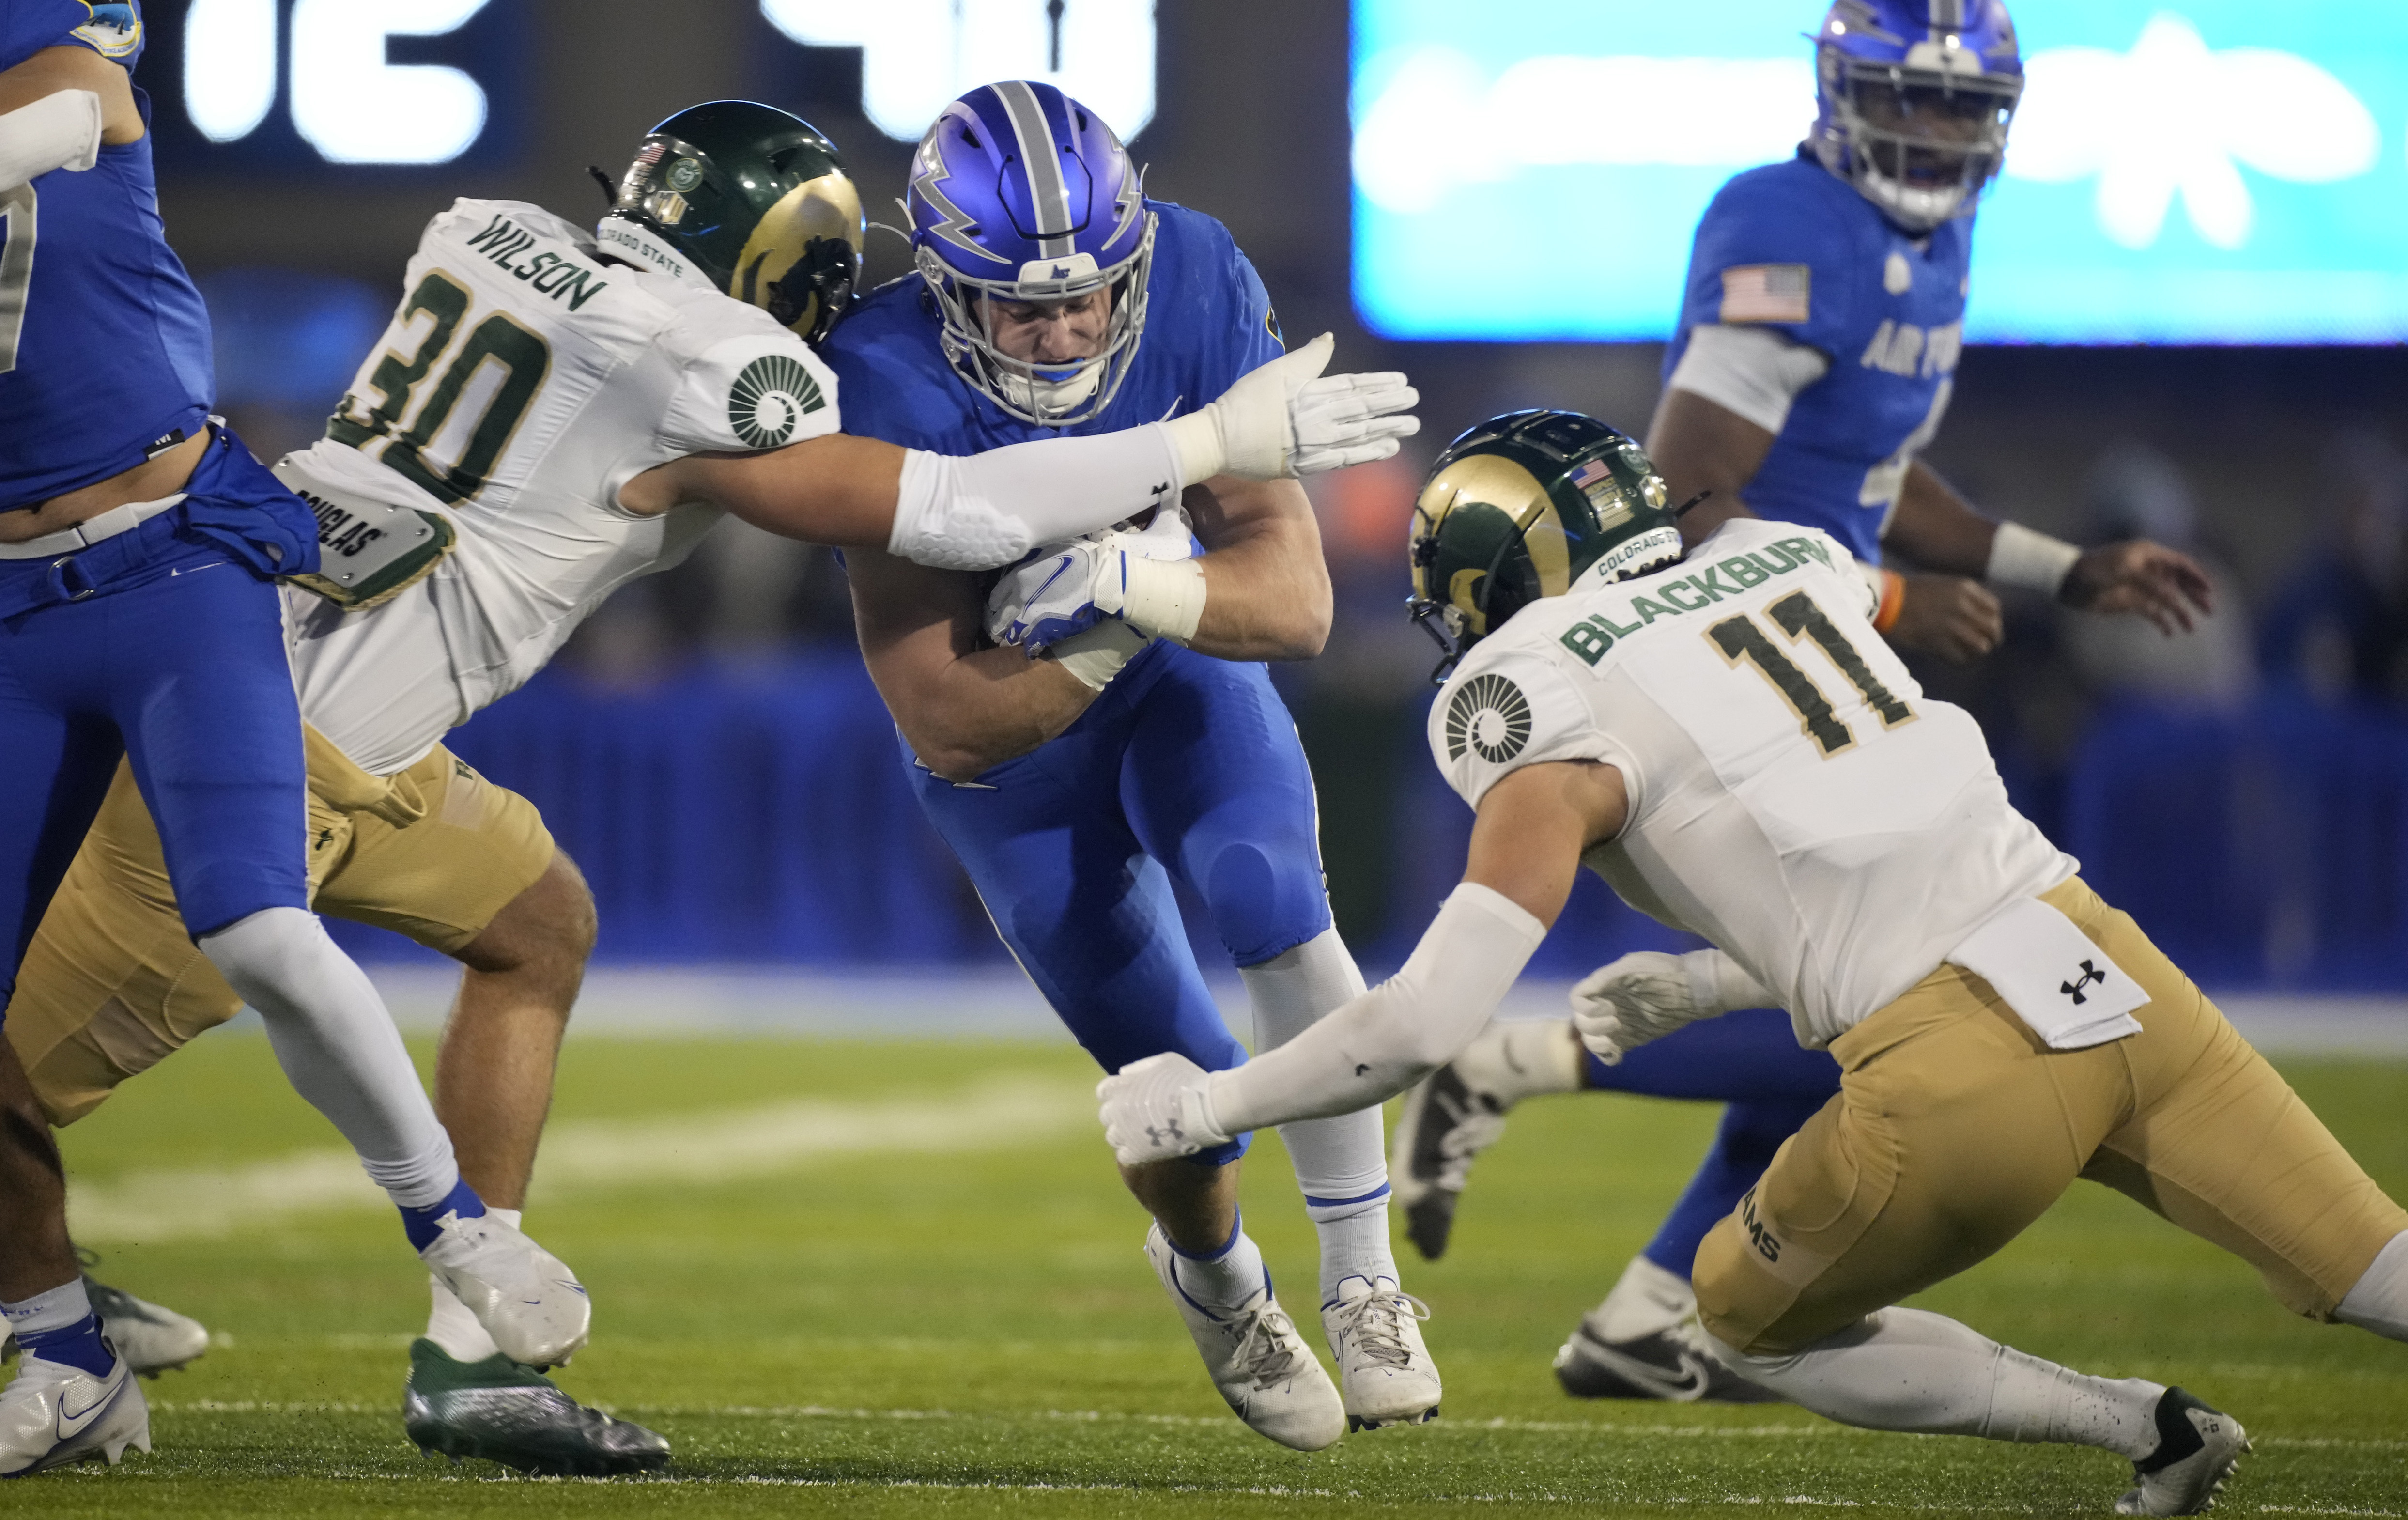 3 things to know about Baylor's bowl game: Air Force used to tough